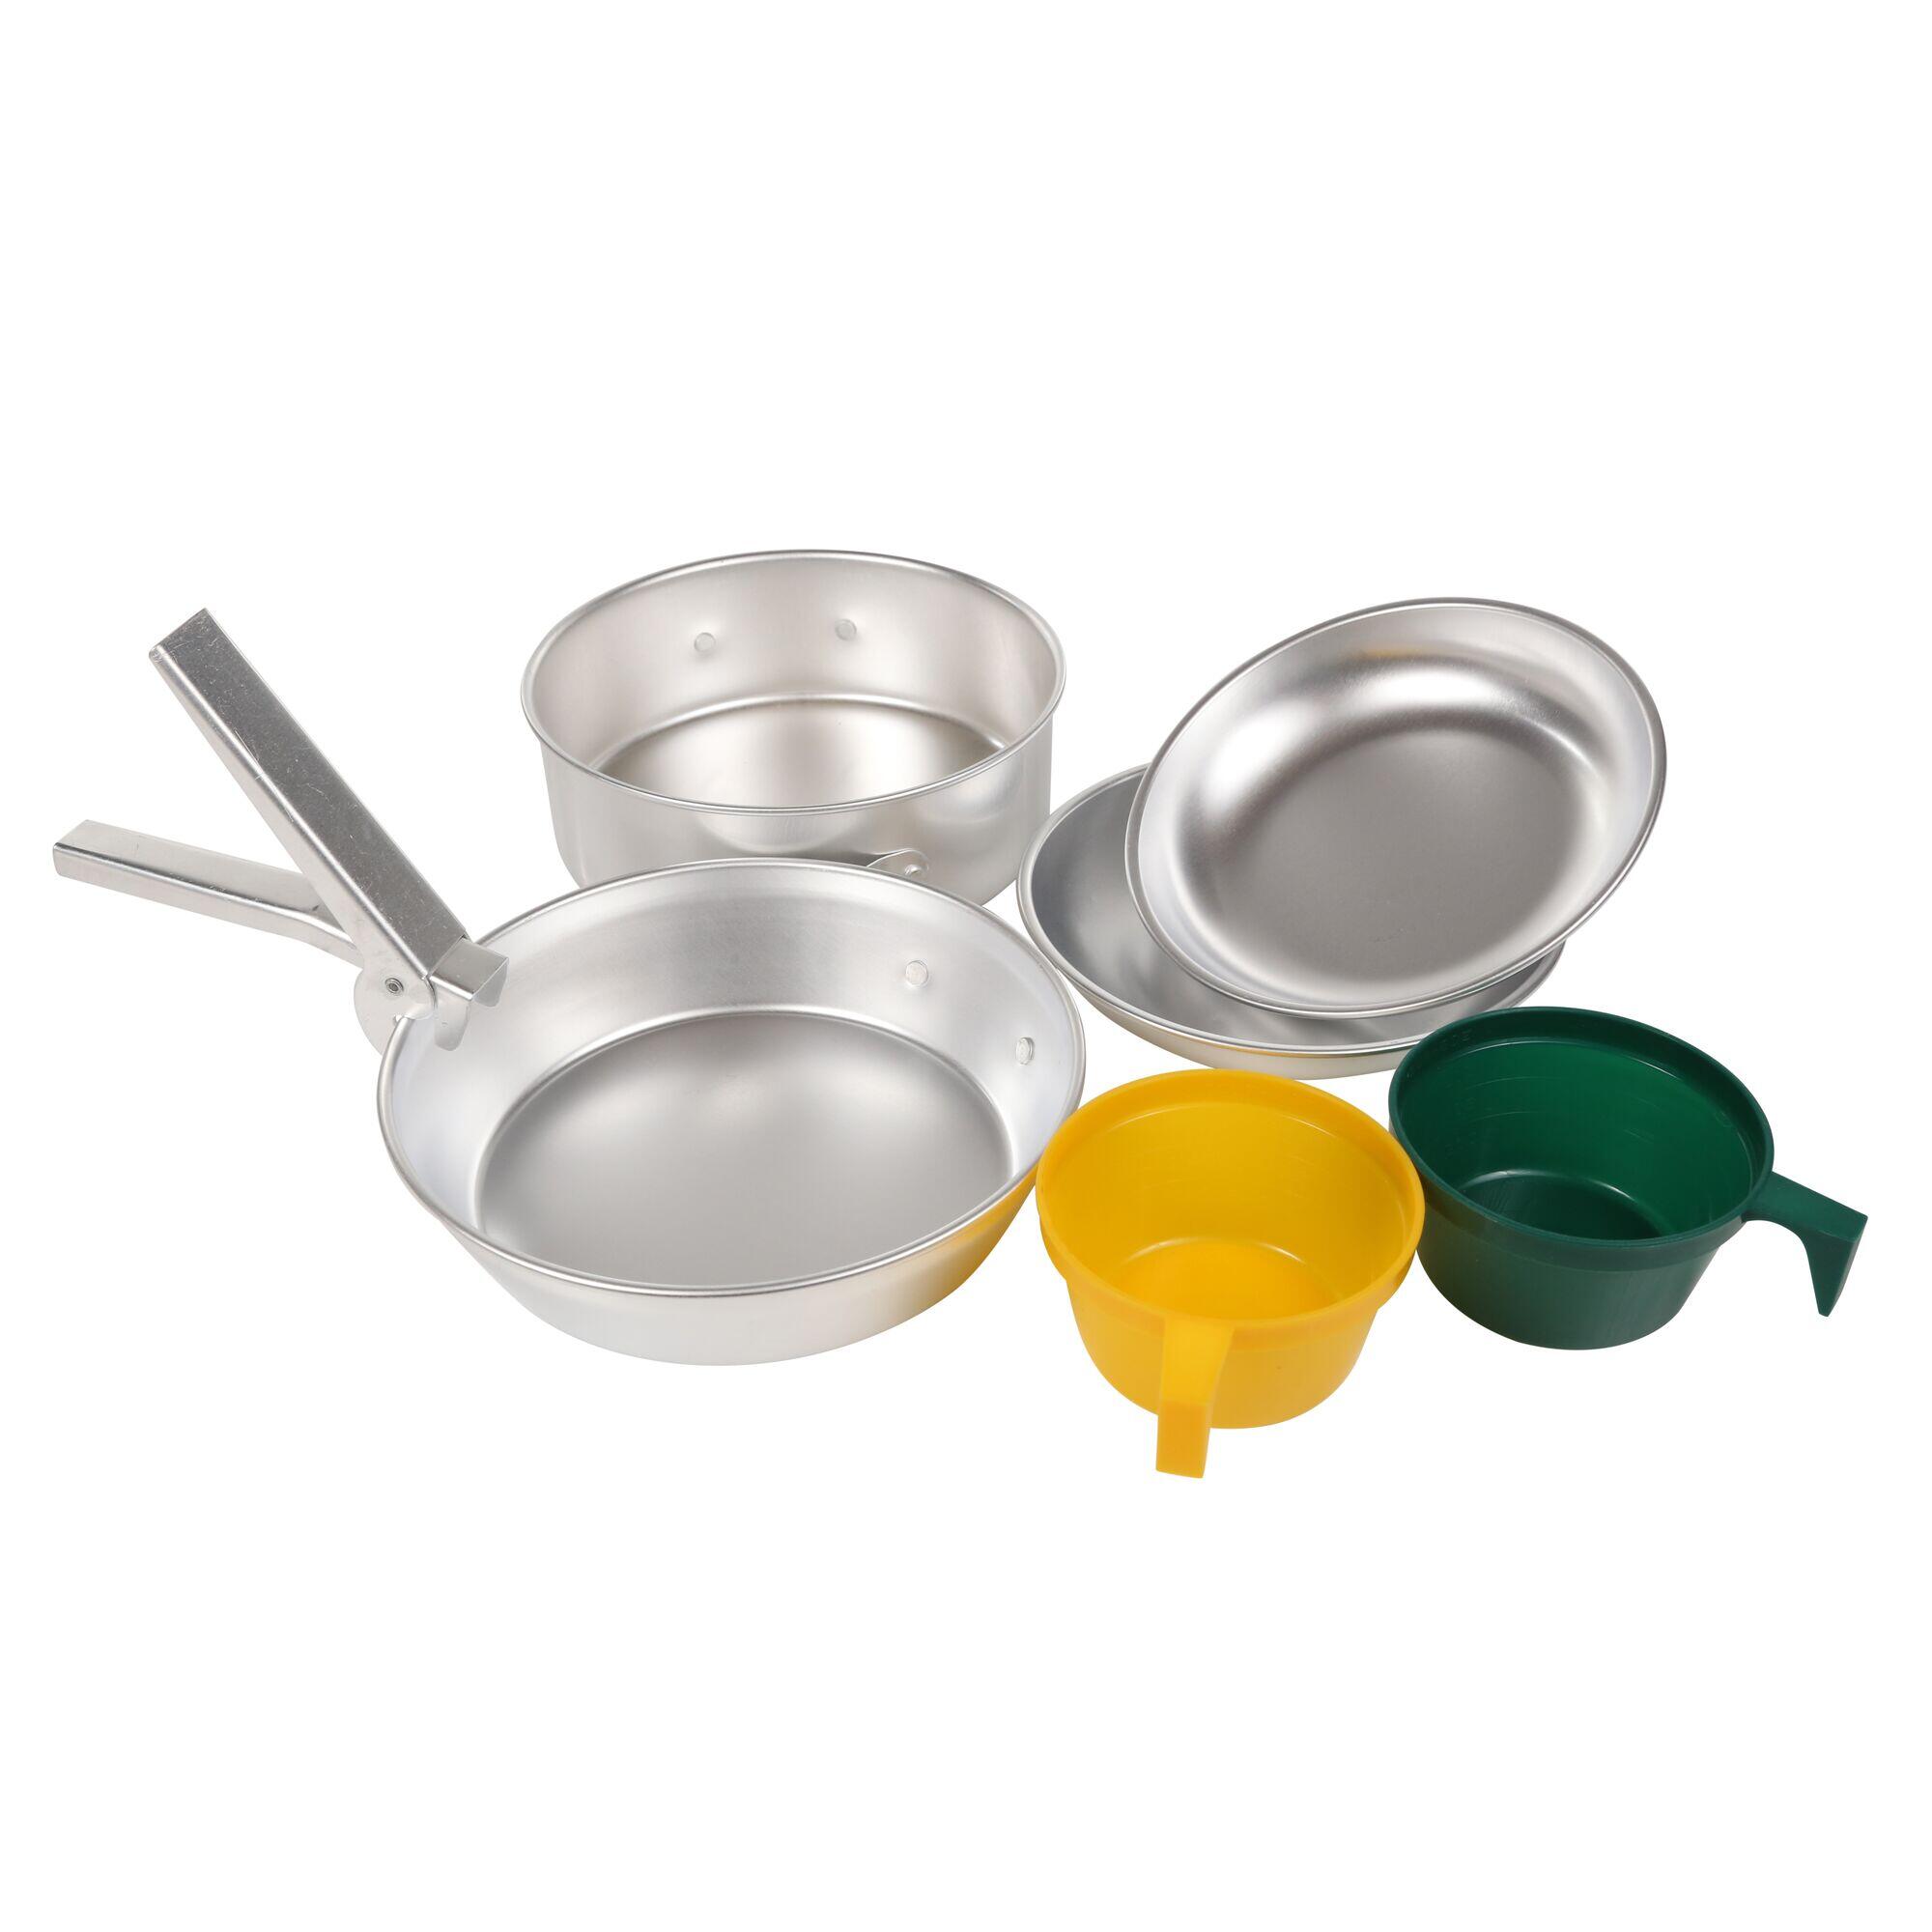 Compact Adults' Camping Cookset - Silver 1/5